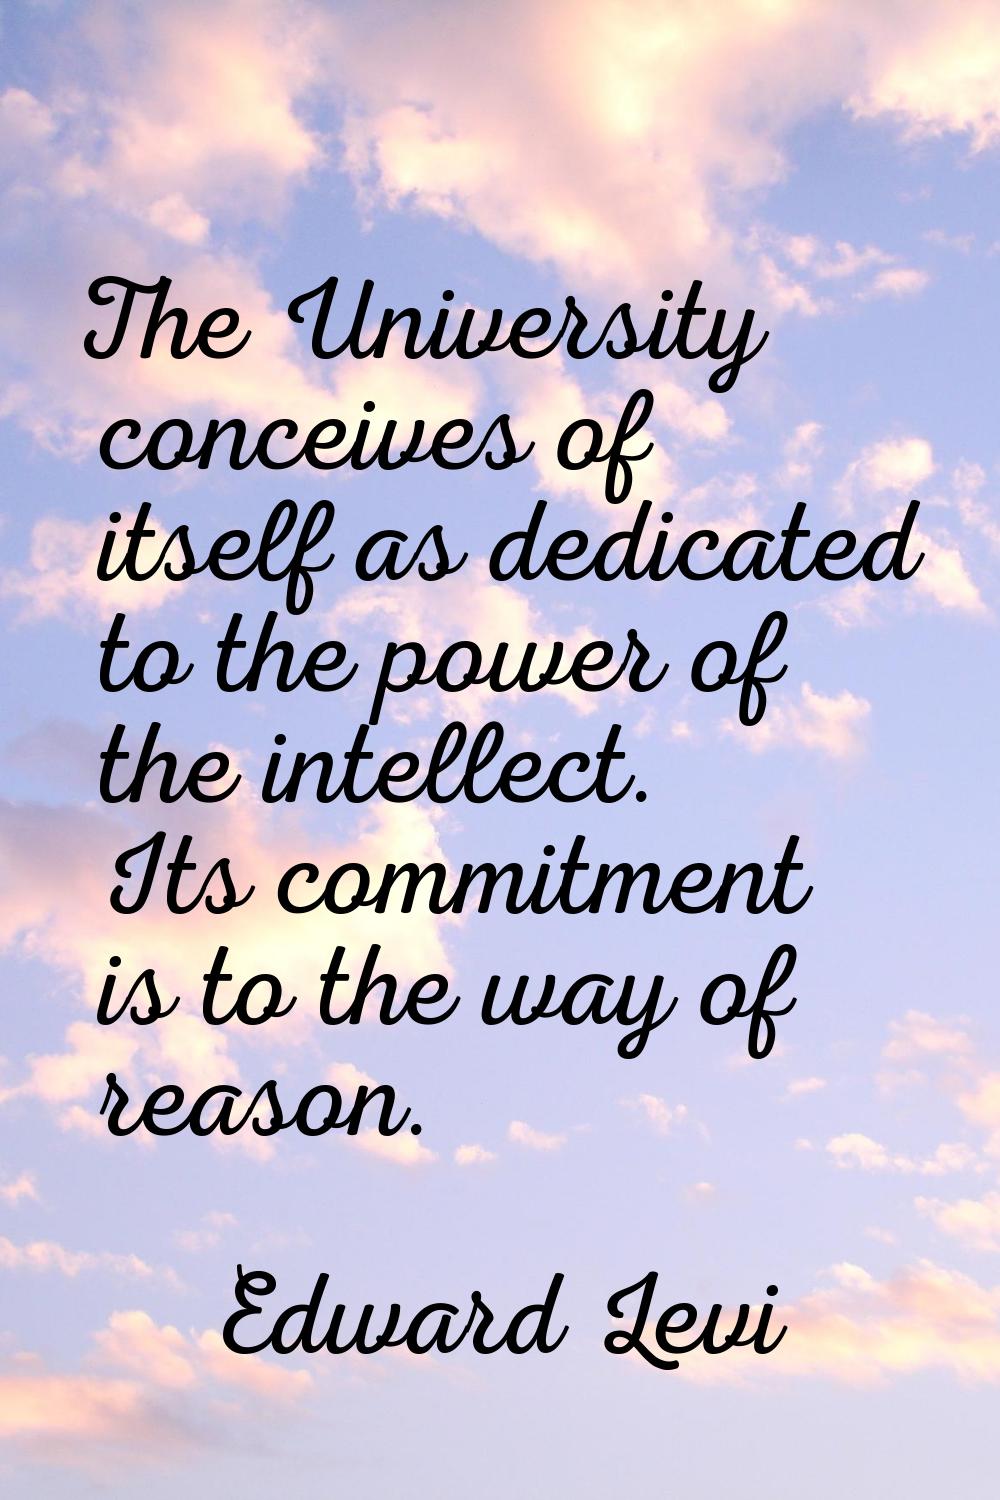 The University conceives of itself as dedicated to the power of the intellect. Its commitment is to